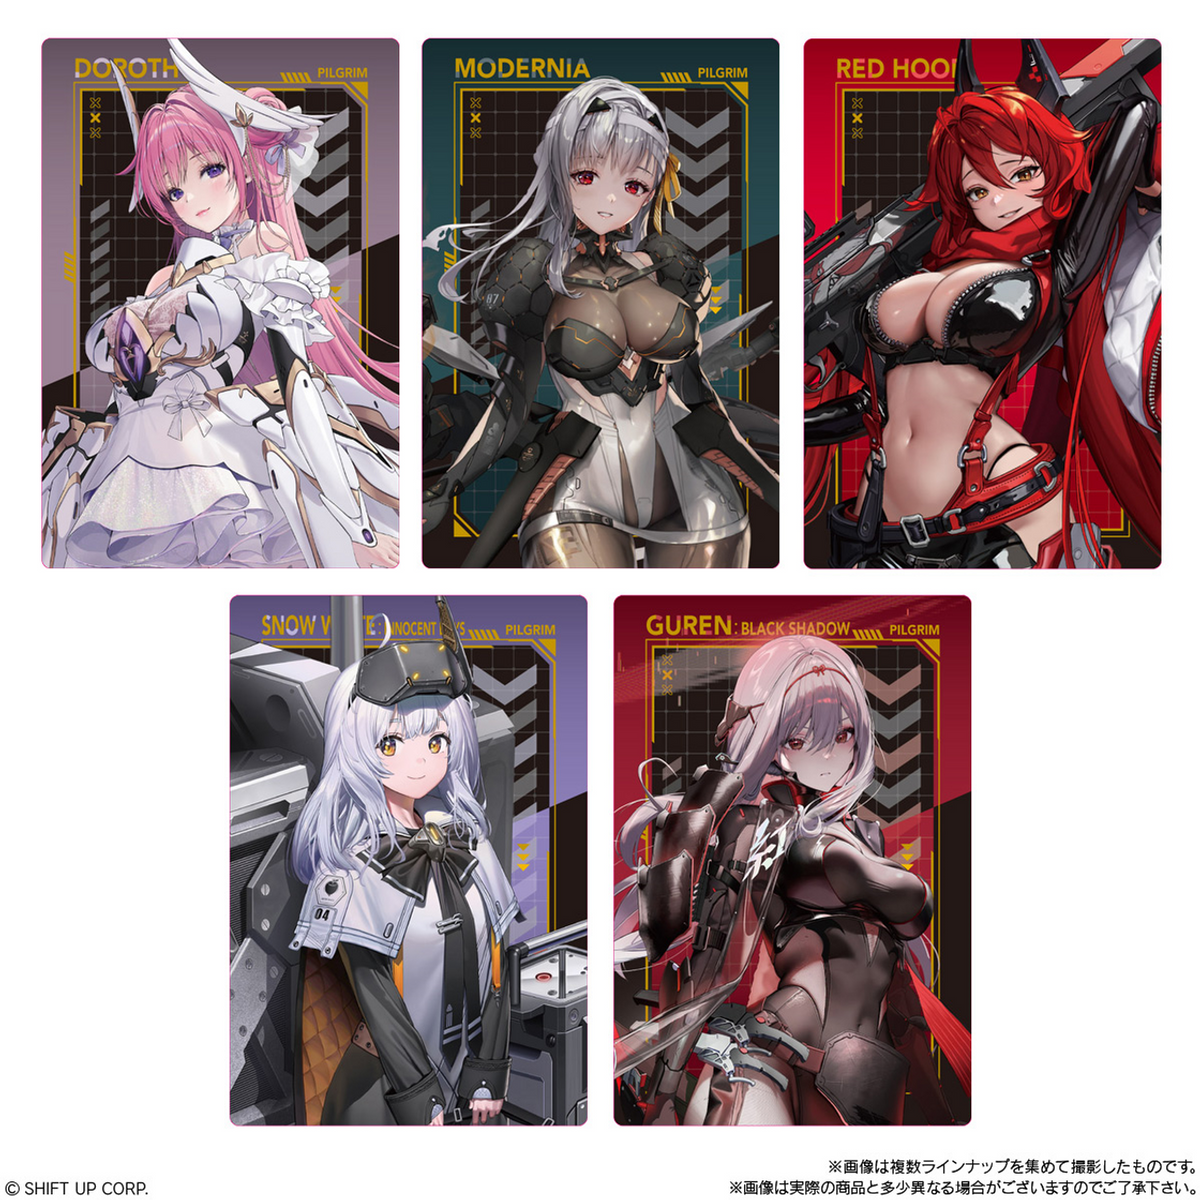 Goddess Of Victory: Nikke Wafers 2-Single Pack (Random)-Bandai-Ace Cards &amp; Collectibles